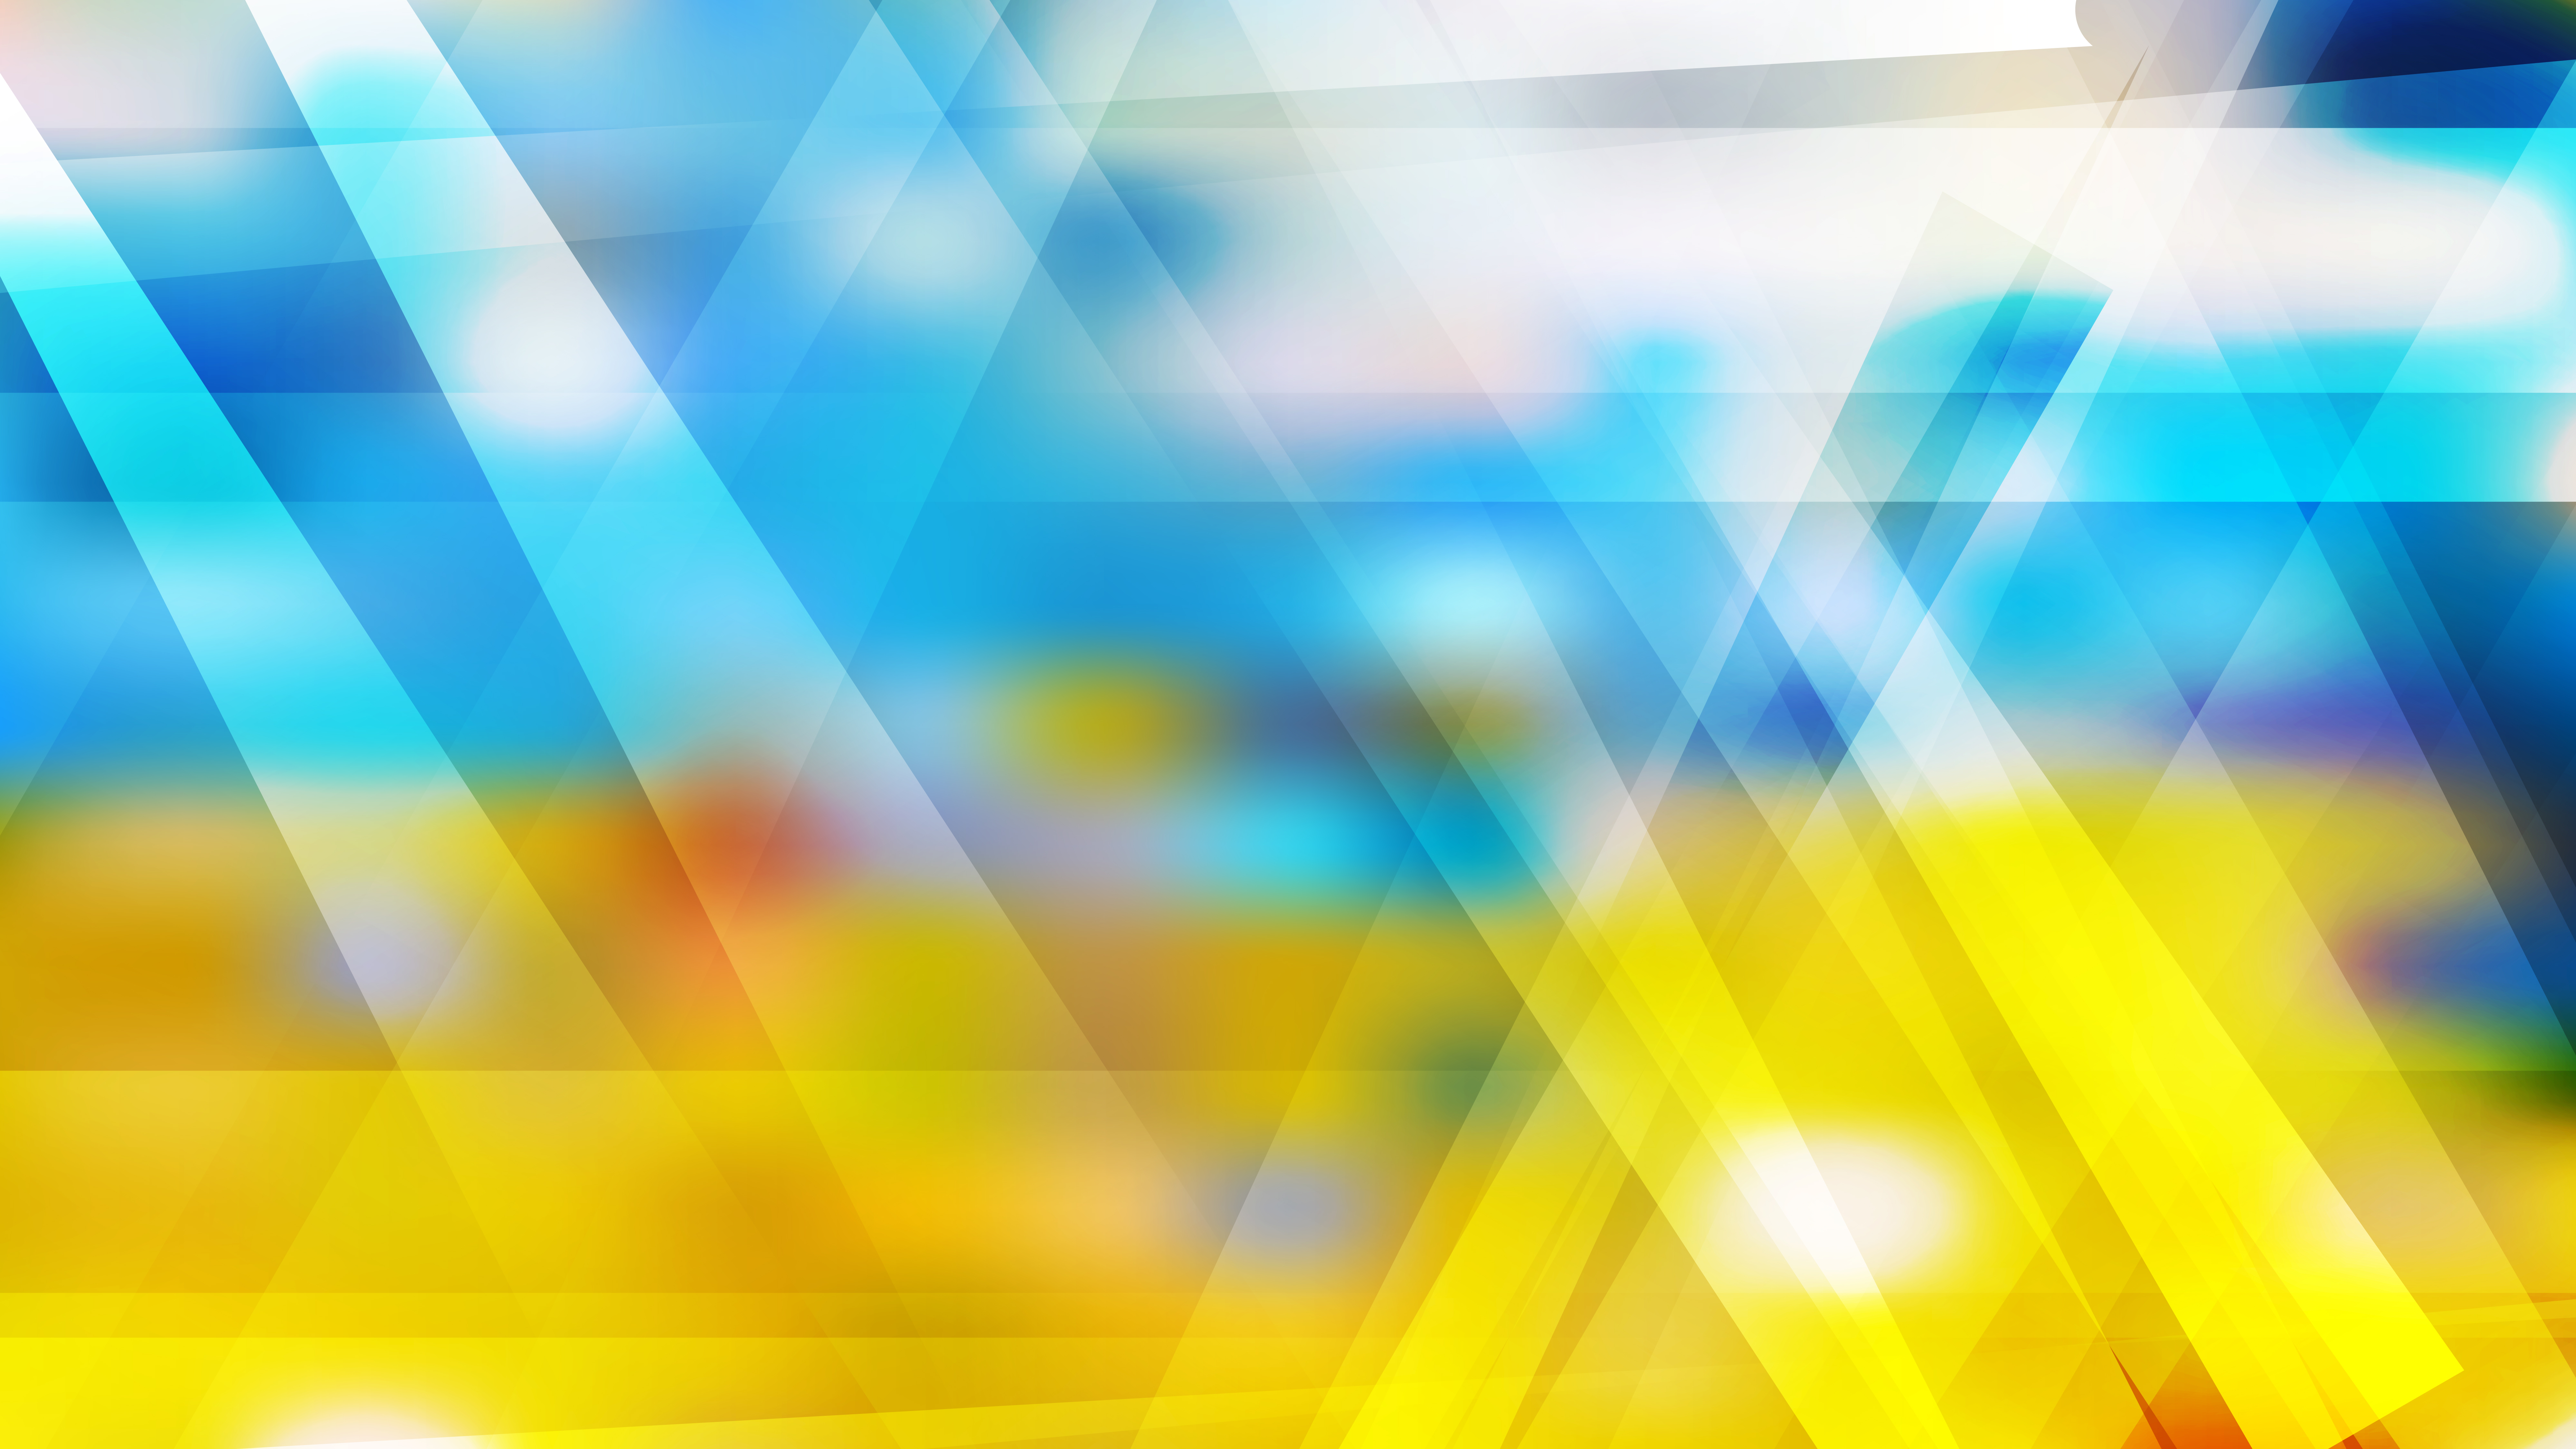 Free Blue Yellow and White Geometric Abstract Background Vector Image